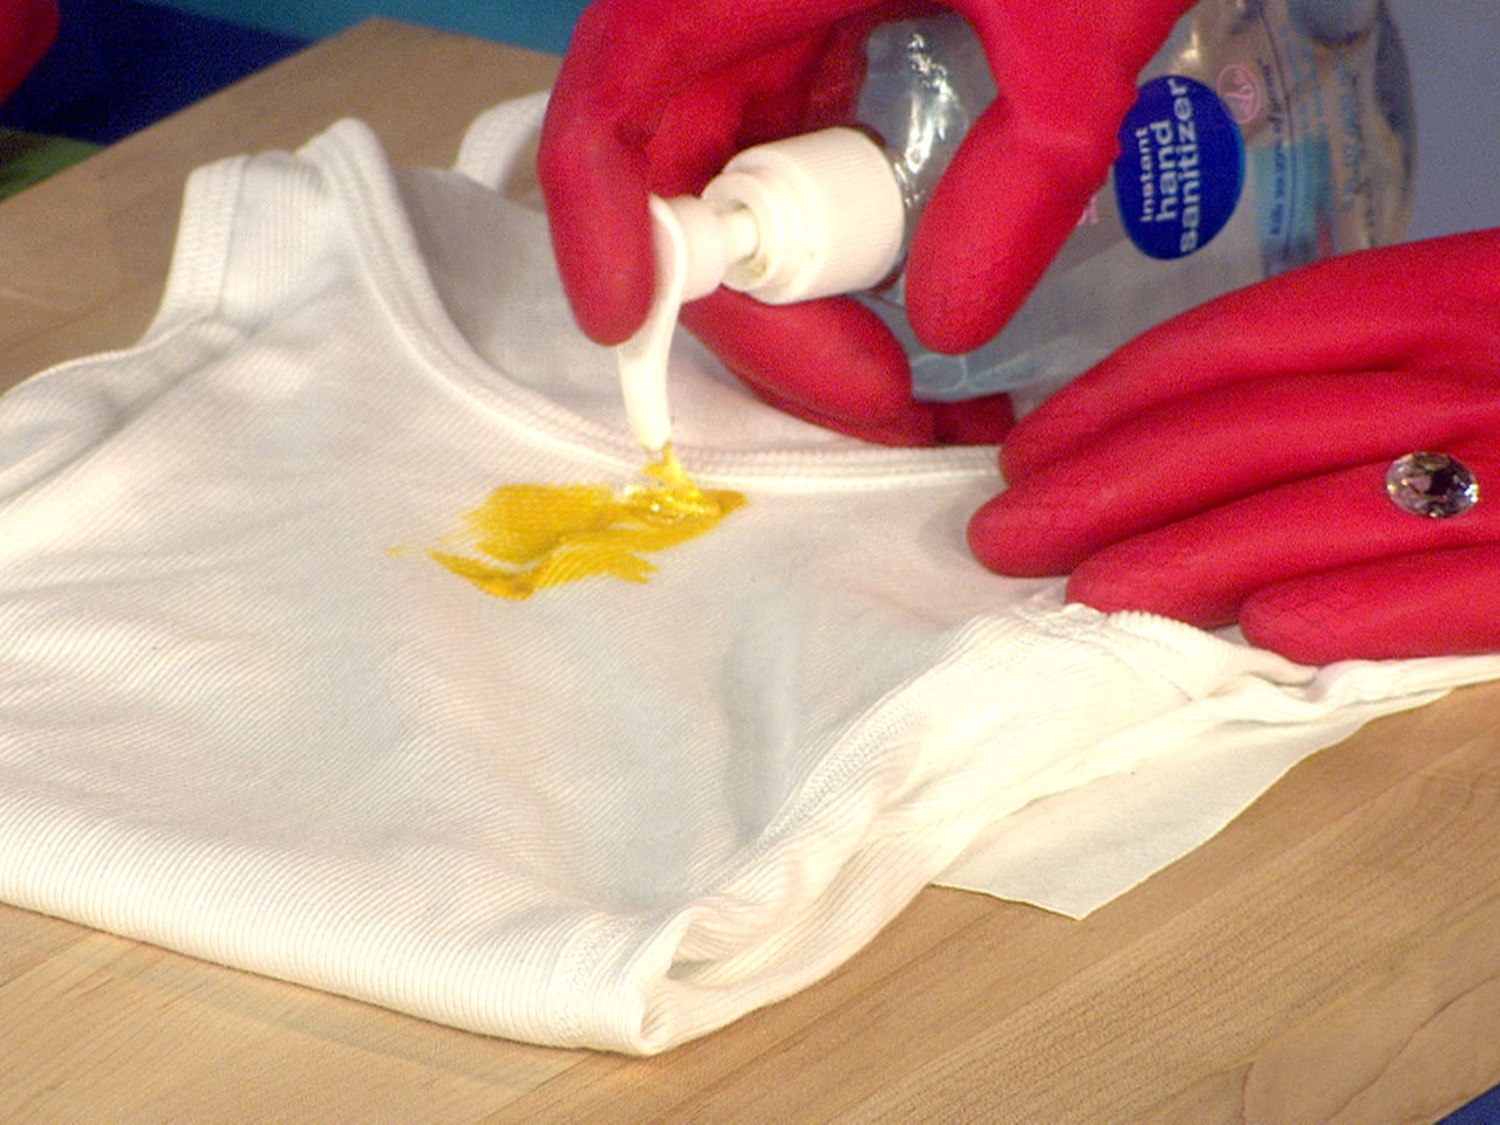 How to Remove Dried Blood Stains from Fabric: Expert Tips